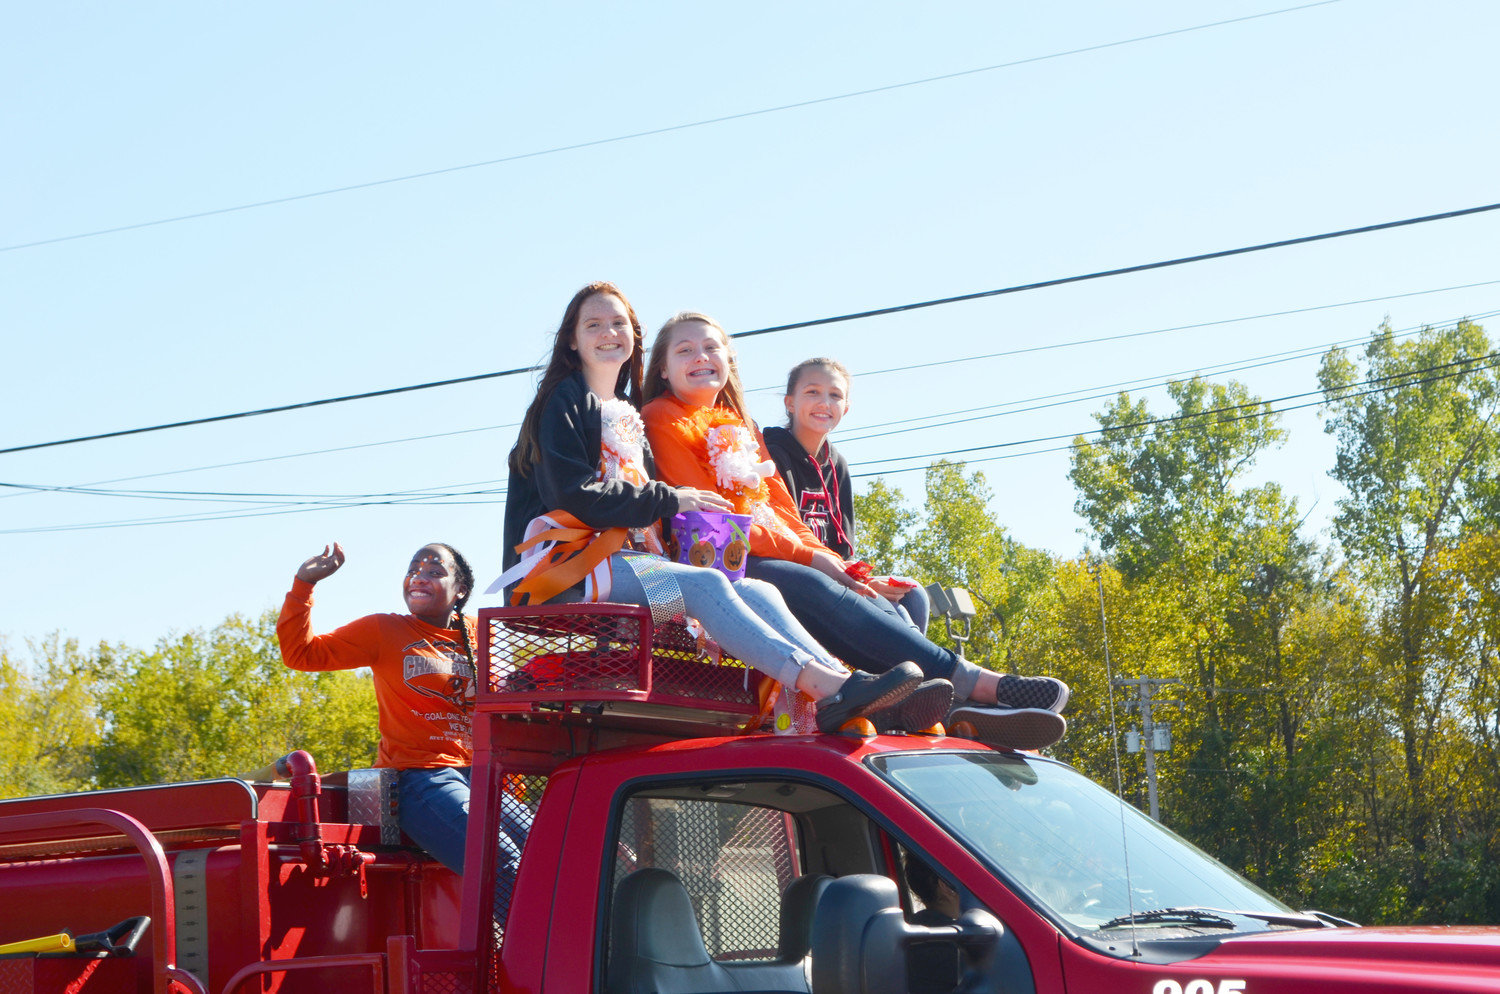 These young ladies show their school spirit aboard a fire truck during Mineola High School’s Homecoming Parade on Friday.